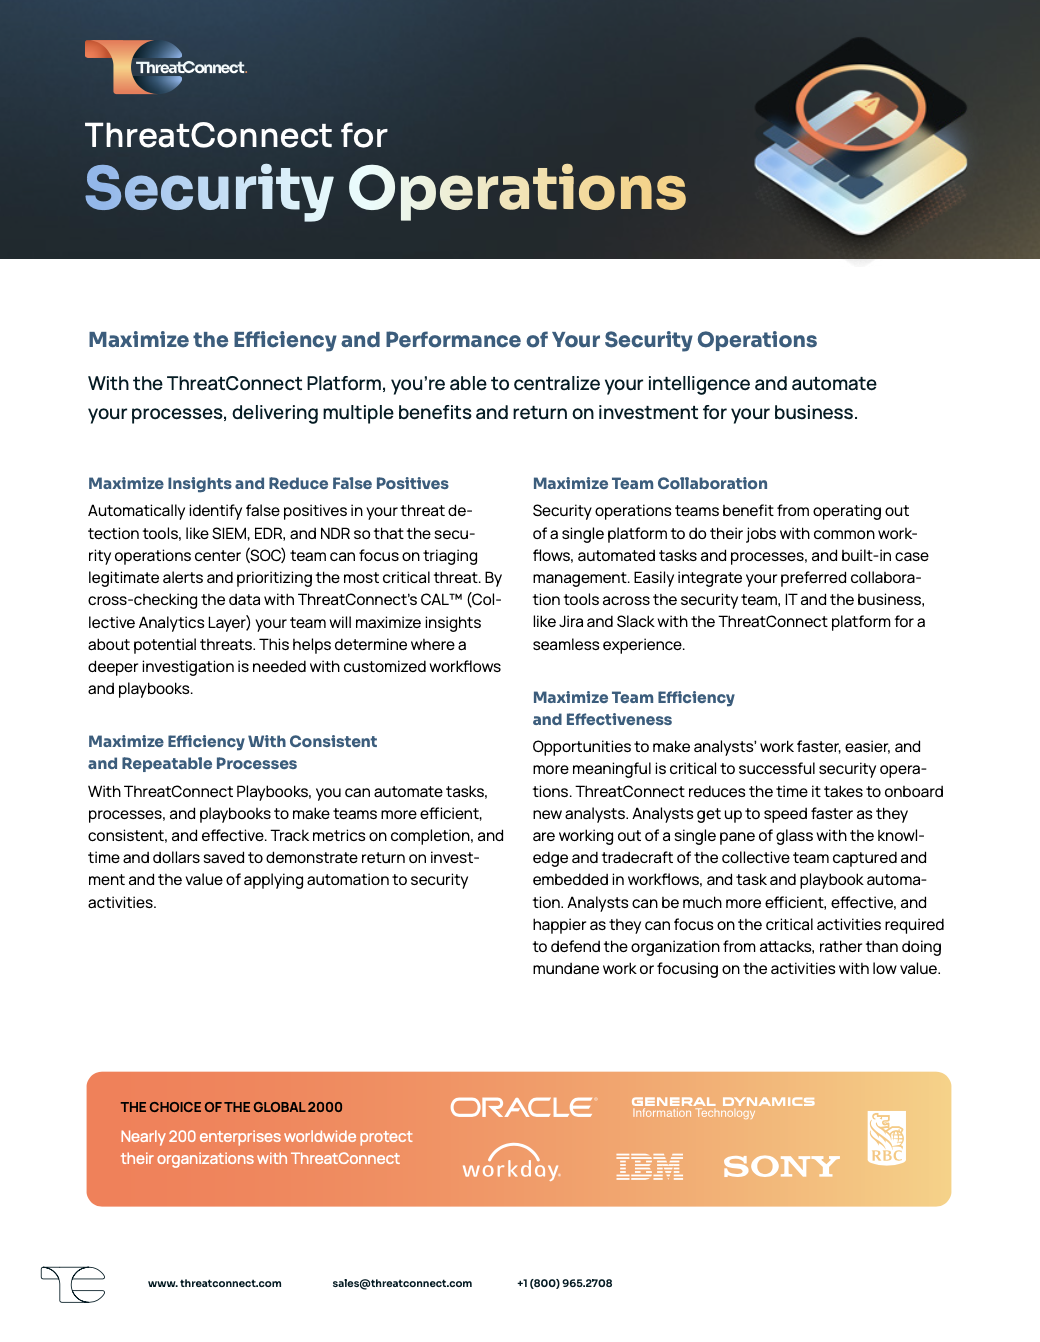 Datasheet on how ThreatConnect supports Security Operations